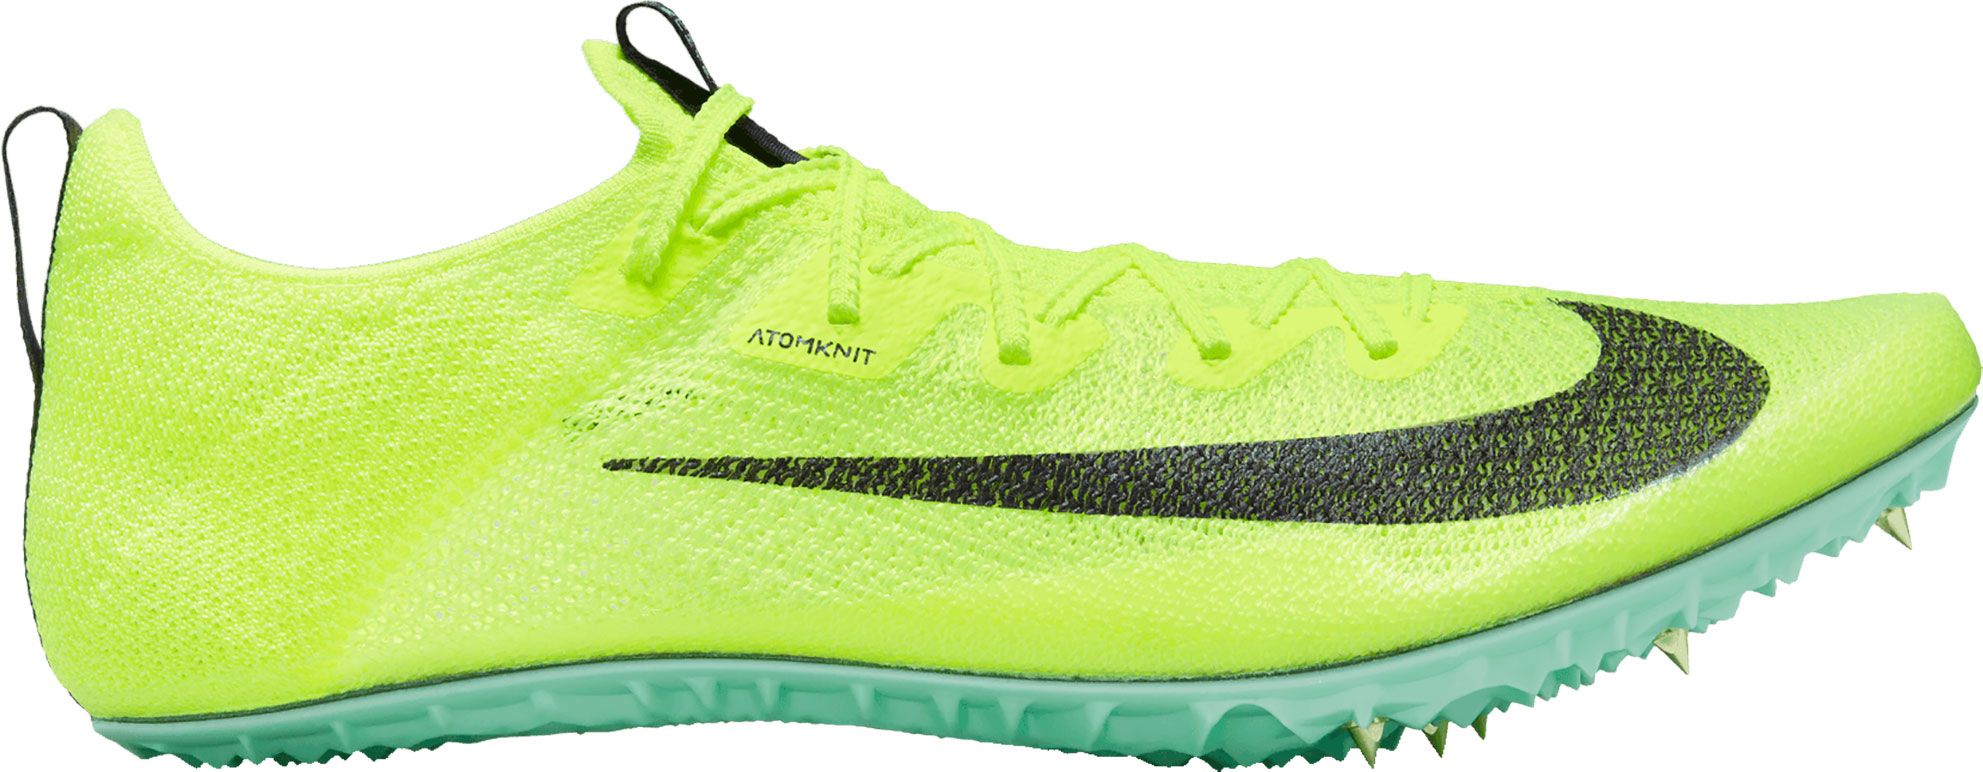 nike zoom superfly flyknit track spikes